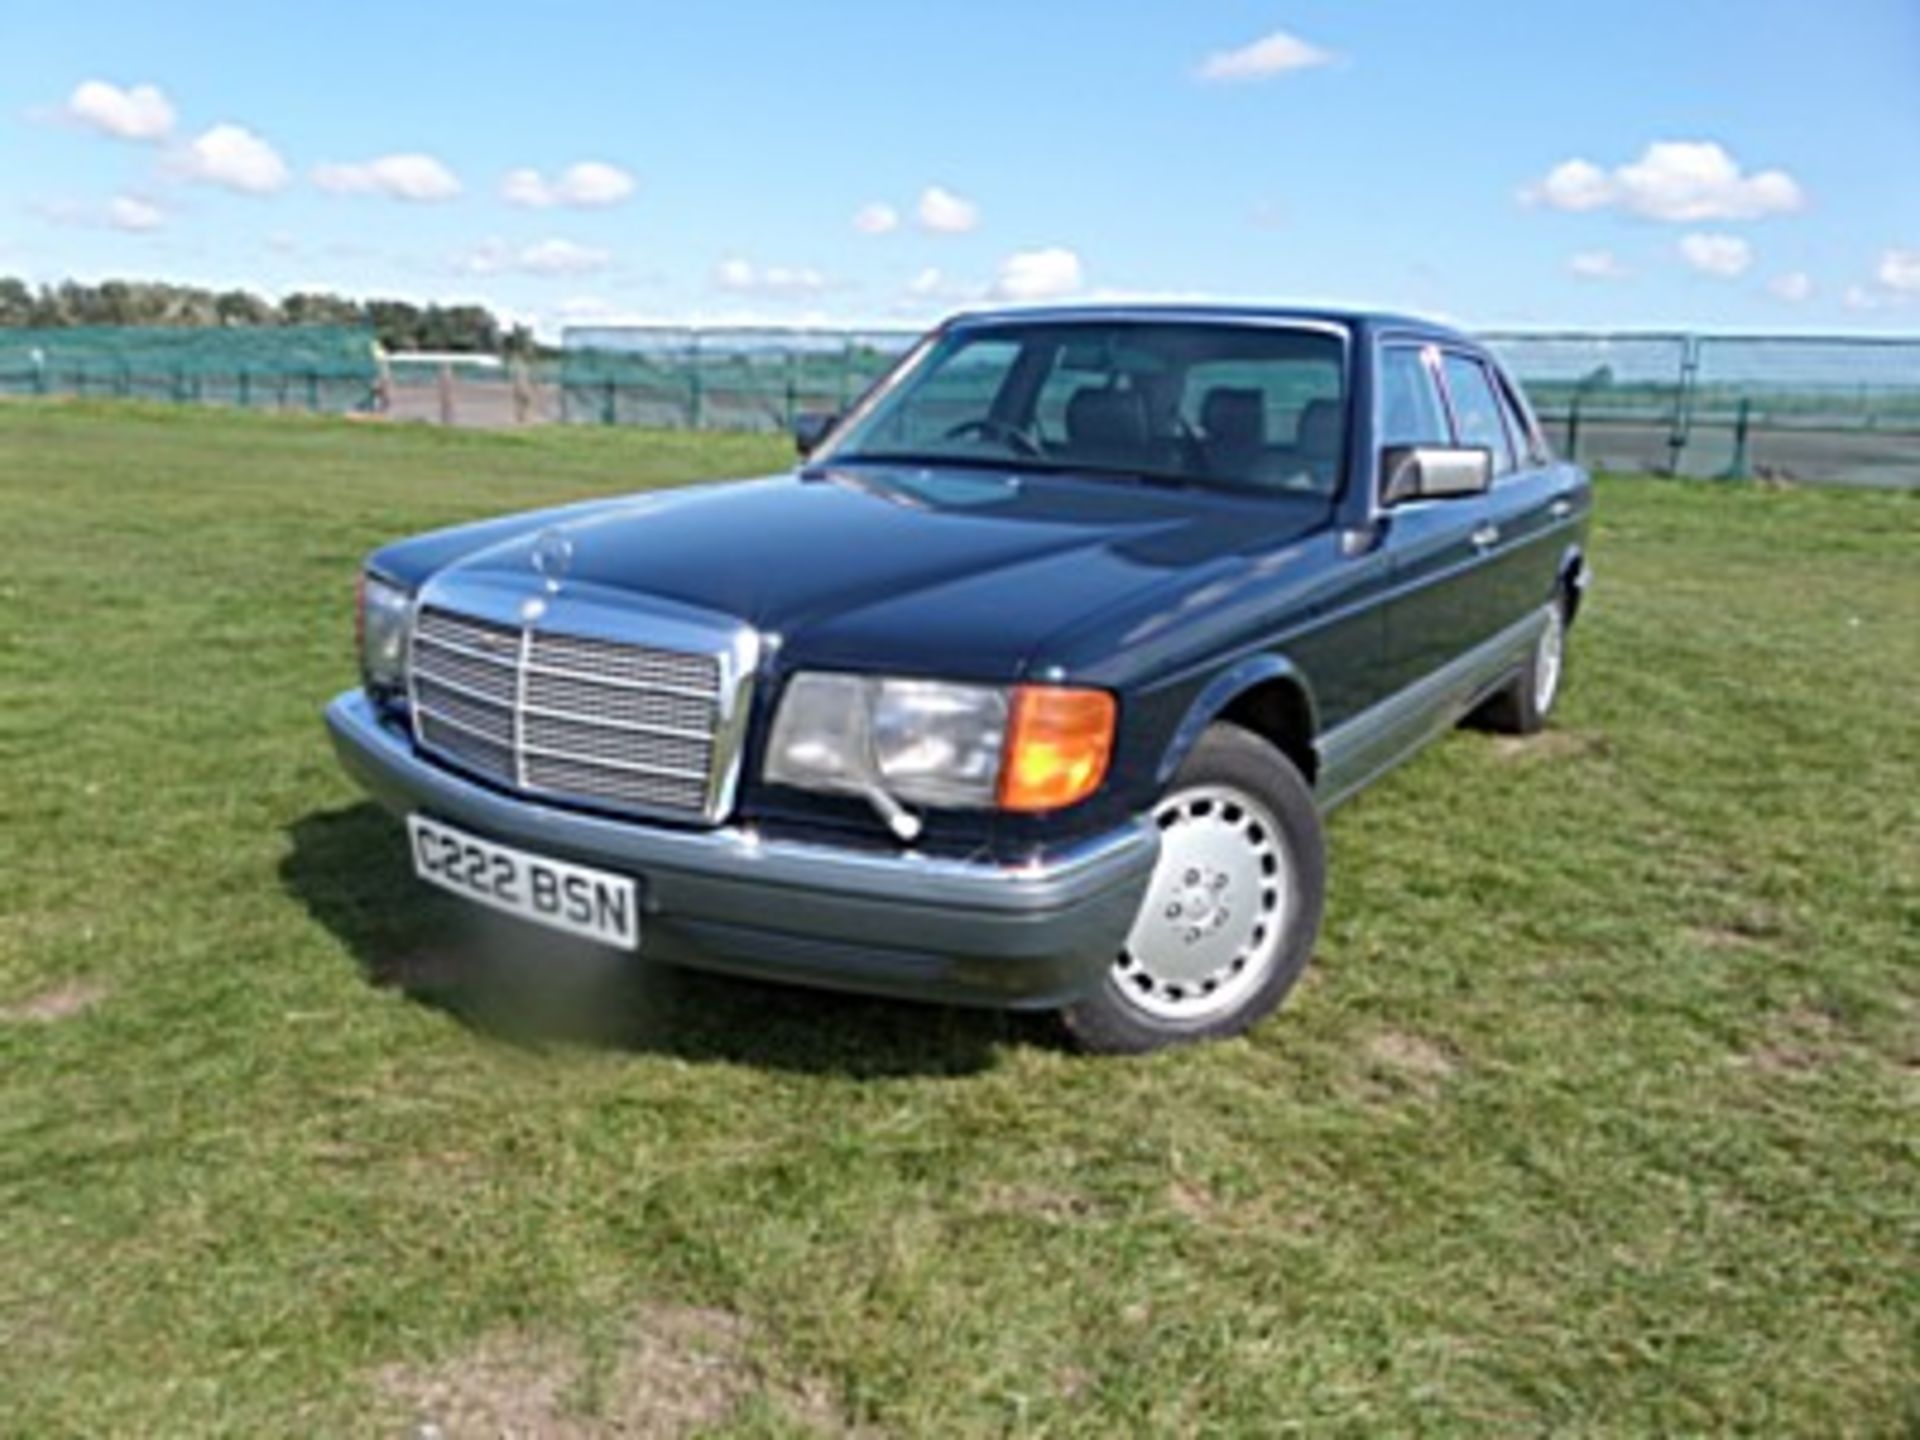 MERCEDES Chassis number WDB1260372A230761 -
ESTIMATE £2000 - £2500 Year 1986